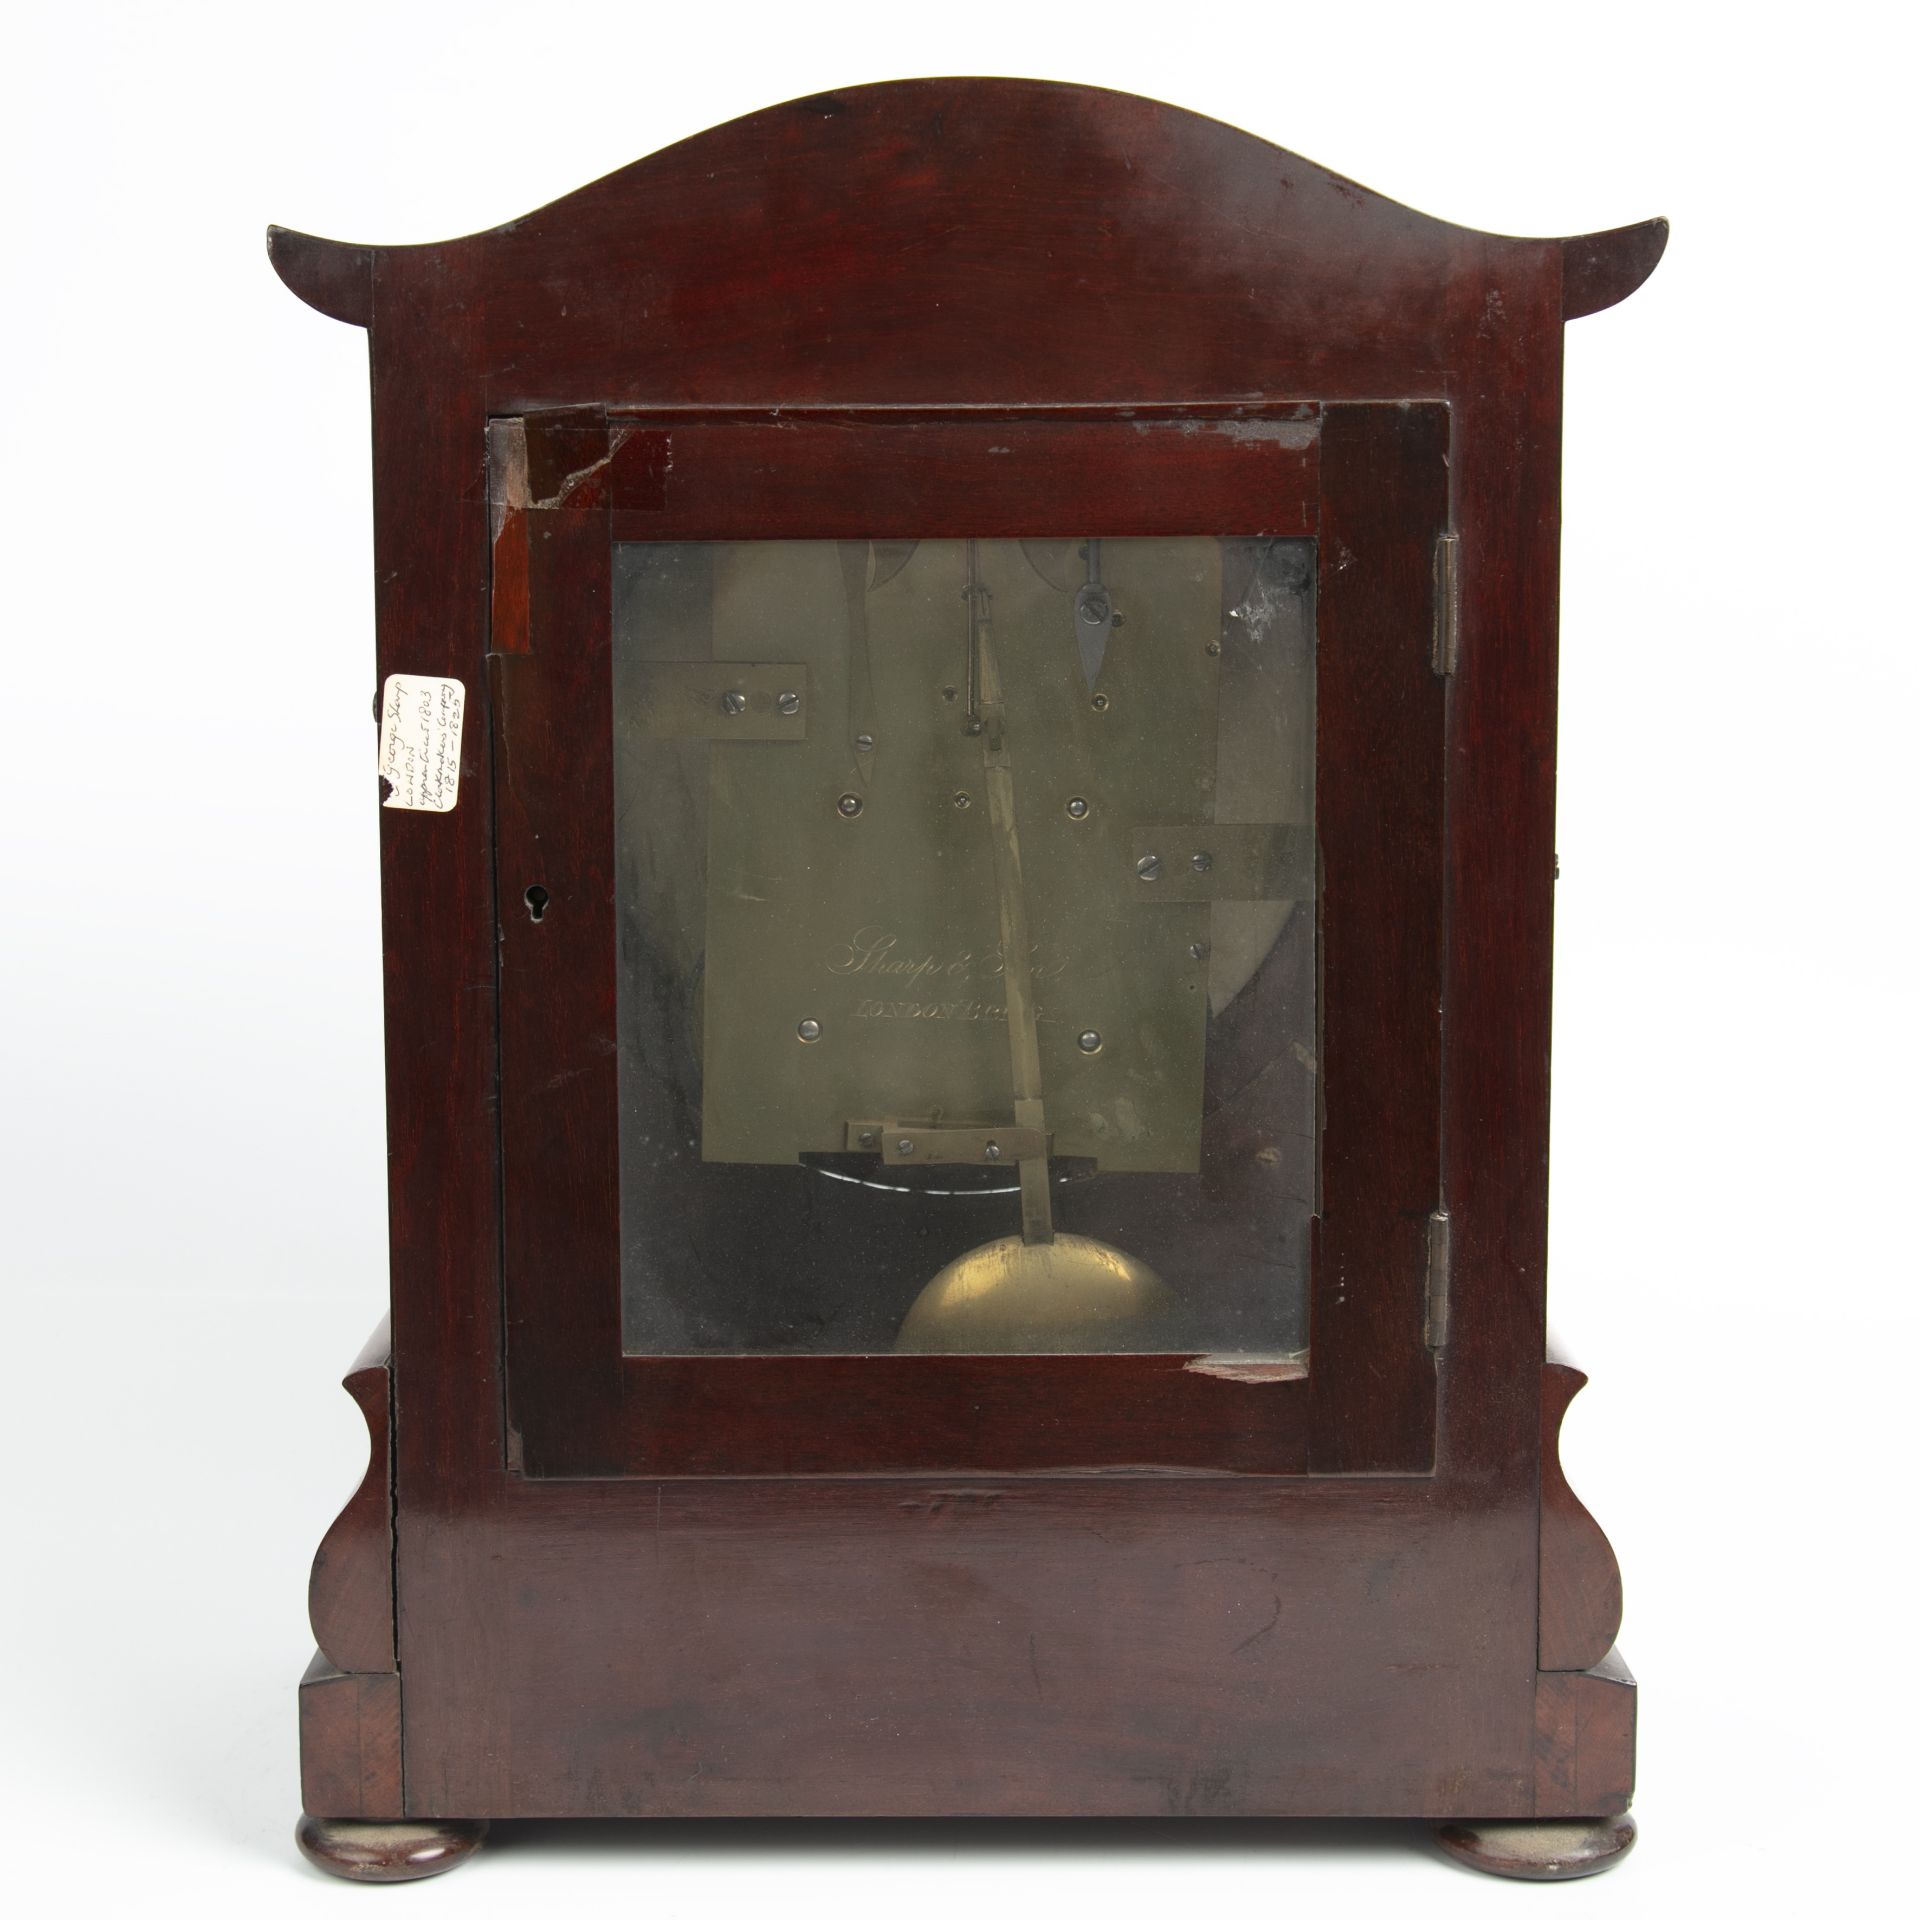 An early 19th century bracket clock by George Sharp having a silvered dial with Roman numerals and a - Bild 4 aus 5